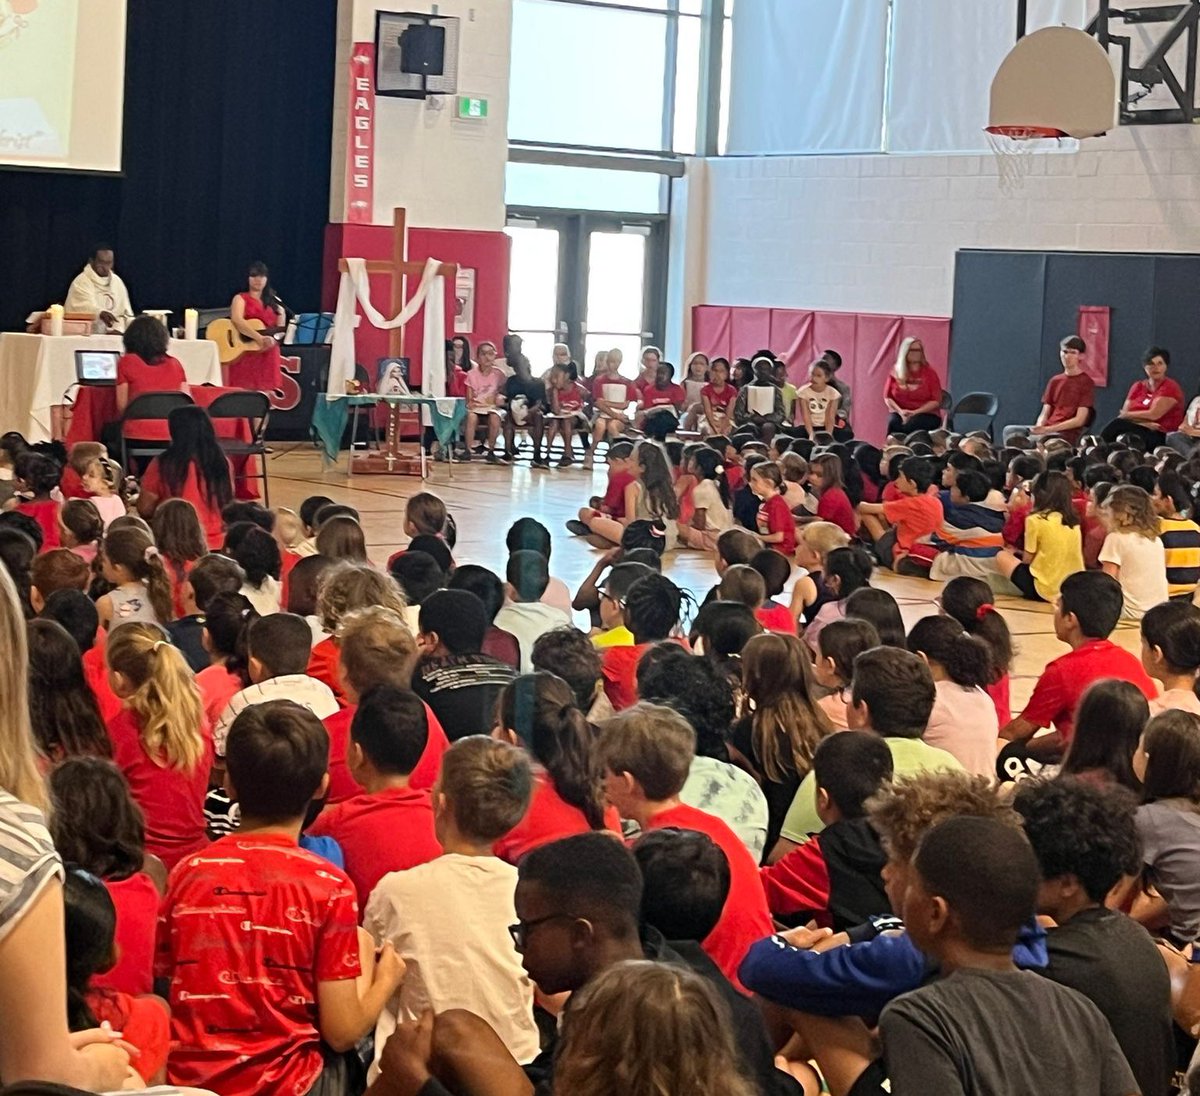 A beautiful show of support today @St_EVAN_Caledon as we celebrated our final mass with Fr. Ravi and were led in song and prayer by our amazing YFAs and choir. #RedShirtDay #RedforAccessAbility